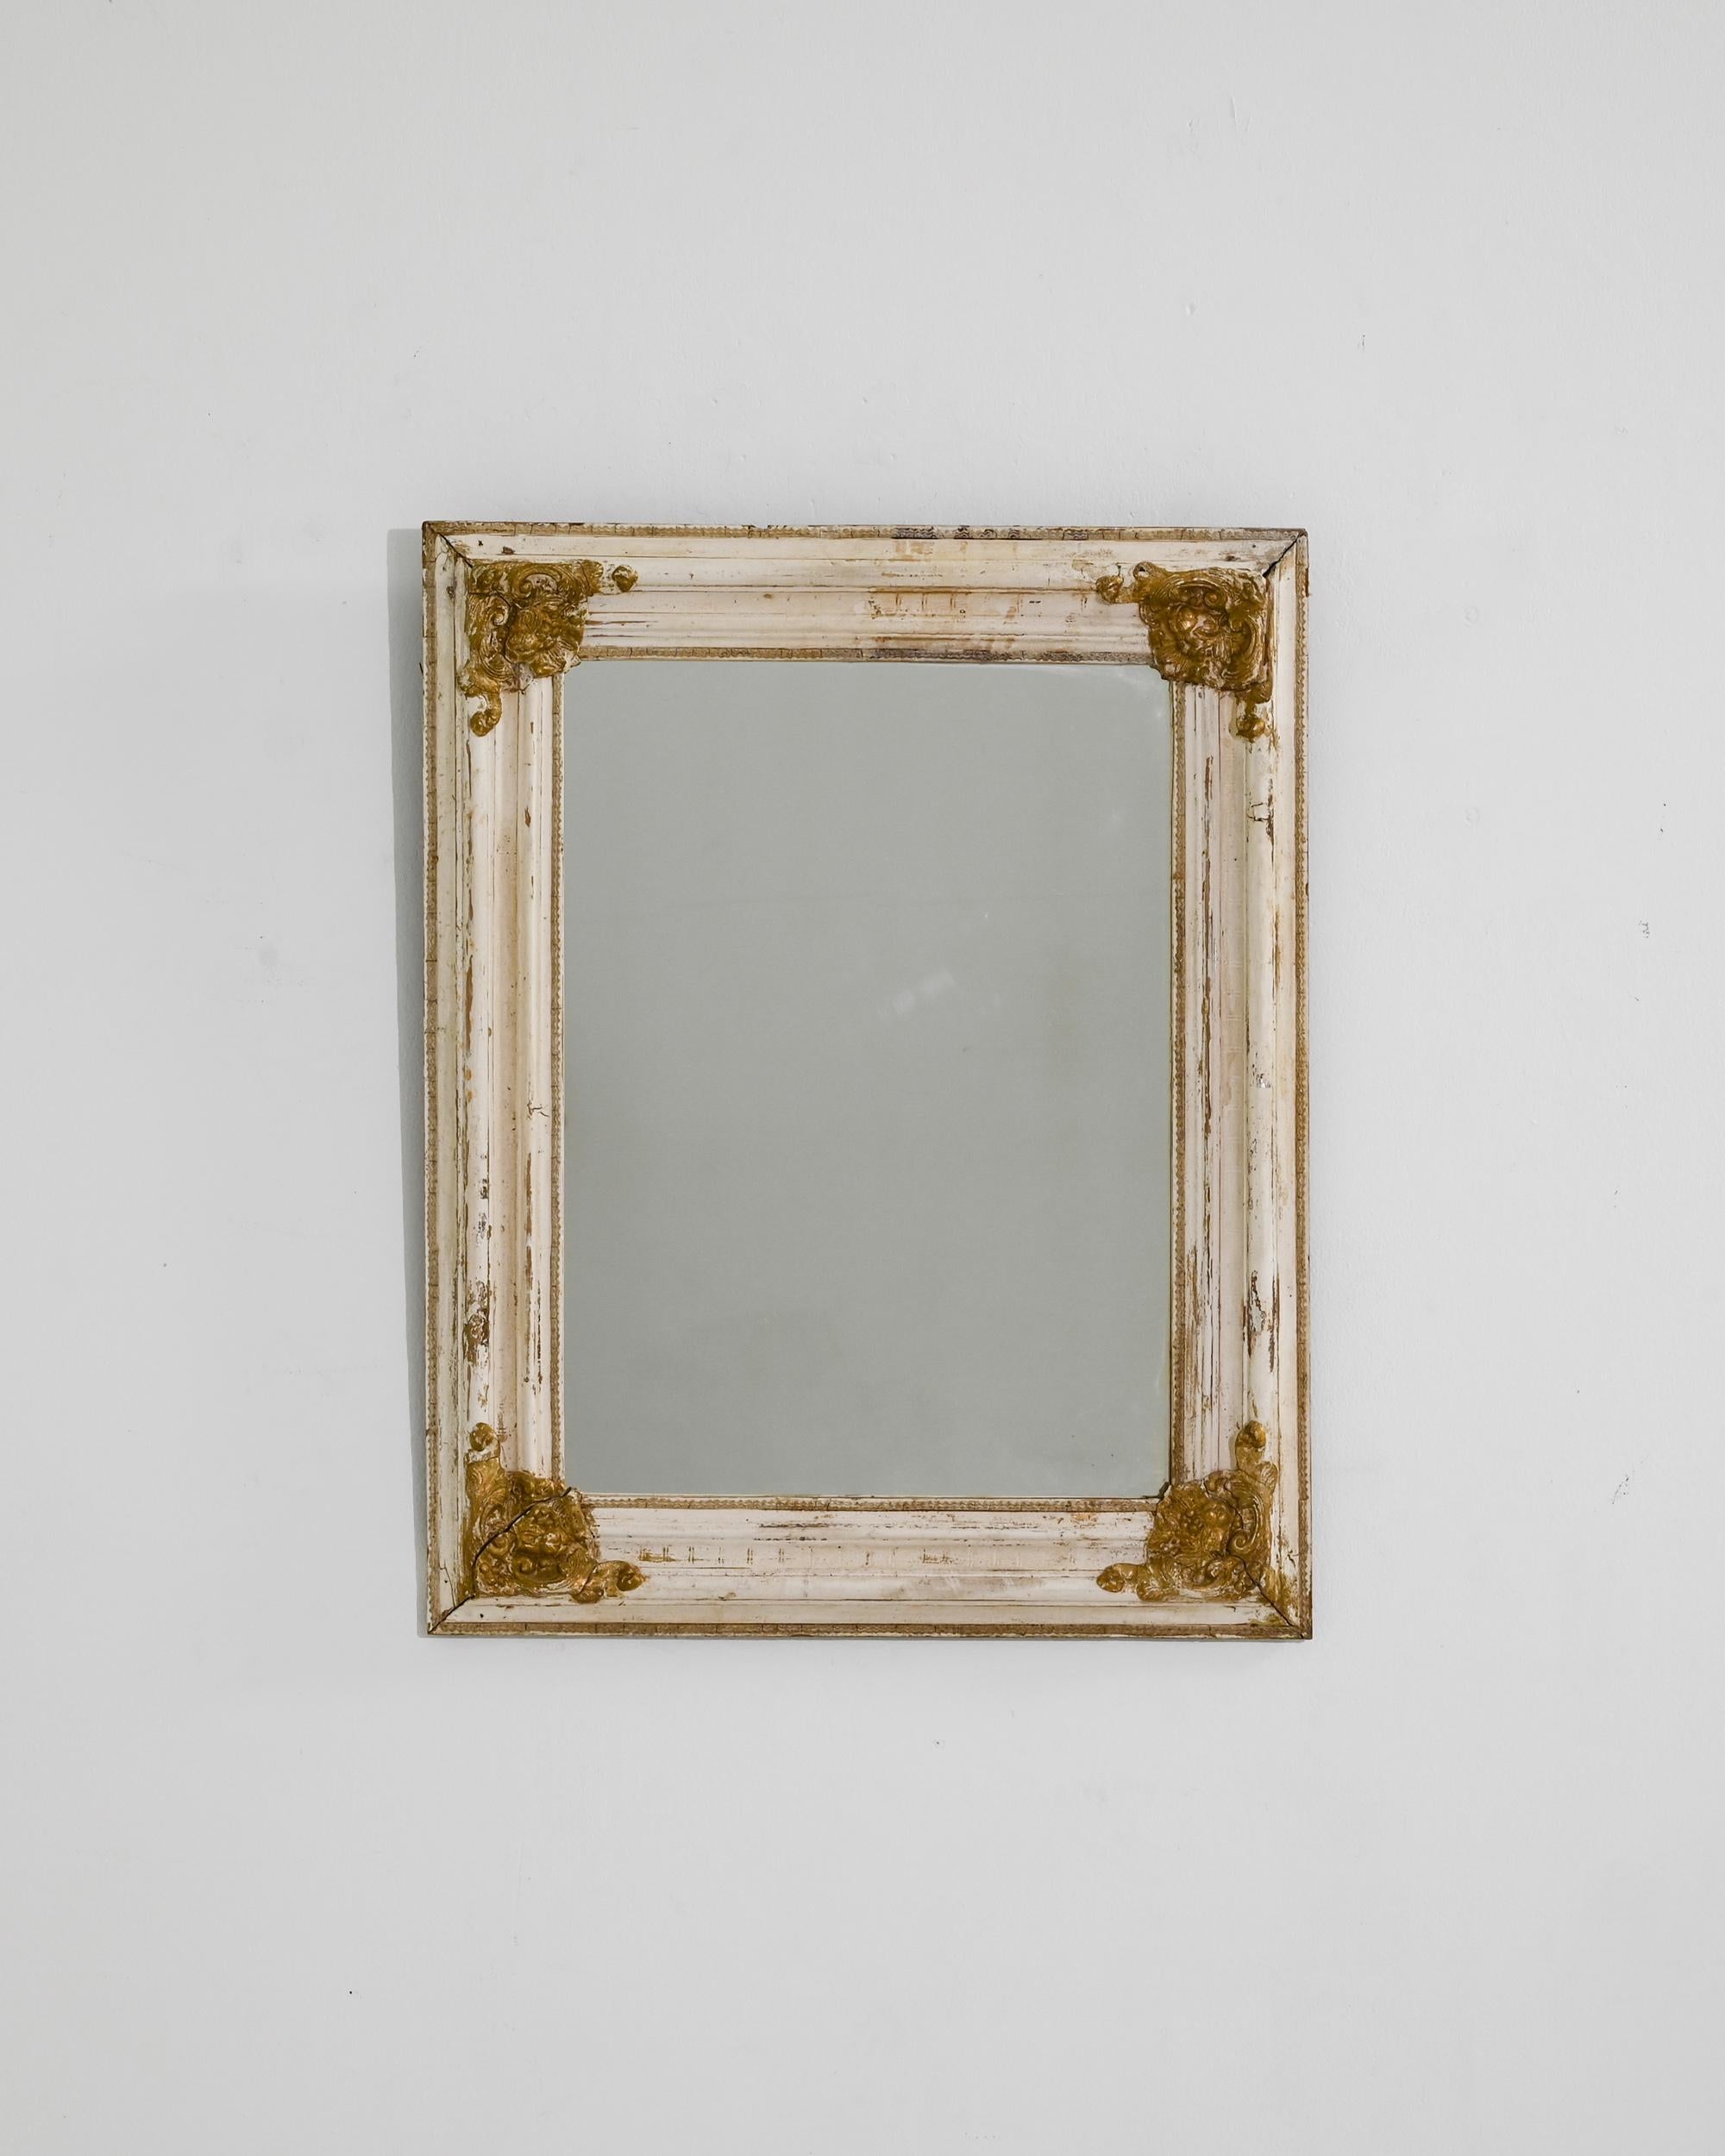 Mirror mirror, this enchanting antique was crafted in France, circa 1920. Made to reflect the fairest, this magic mirror tells the story of life in another era. Profiled edges were carved by hand, lending a refined expression to the minimal shape;